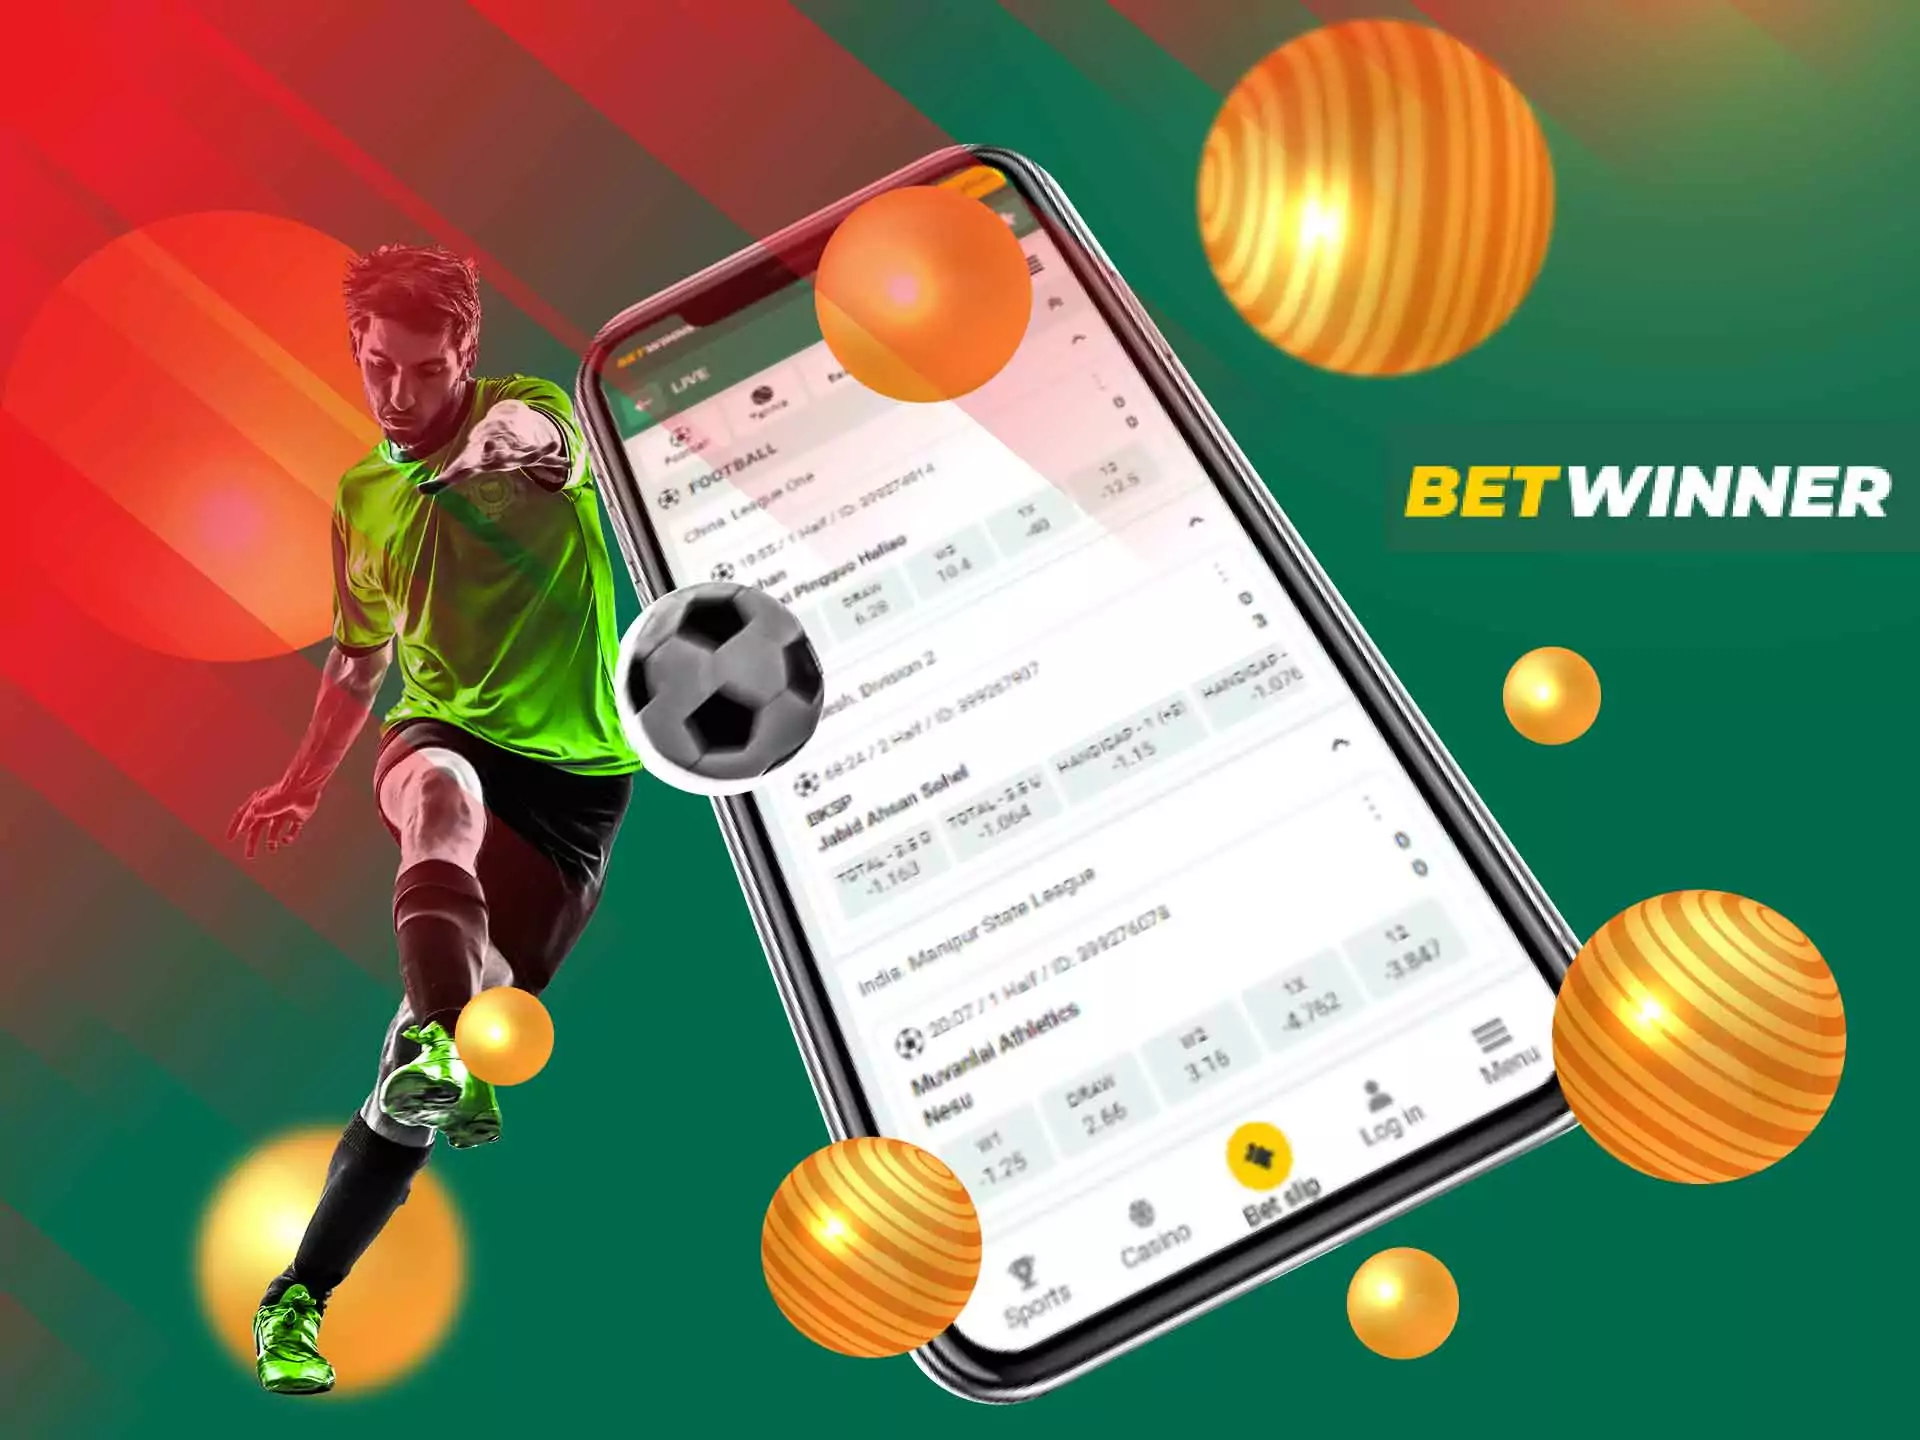 You can watch live streamings and bet right on the Betwinner website.